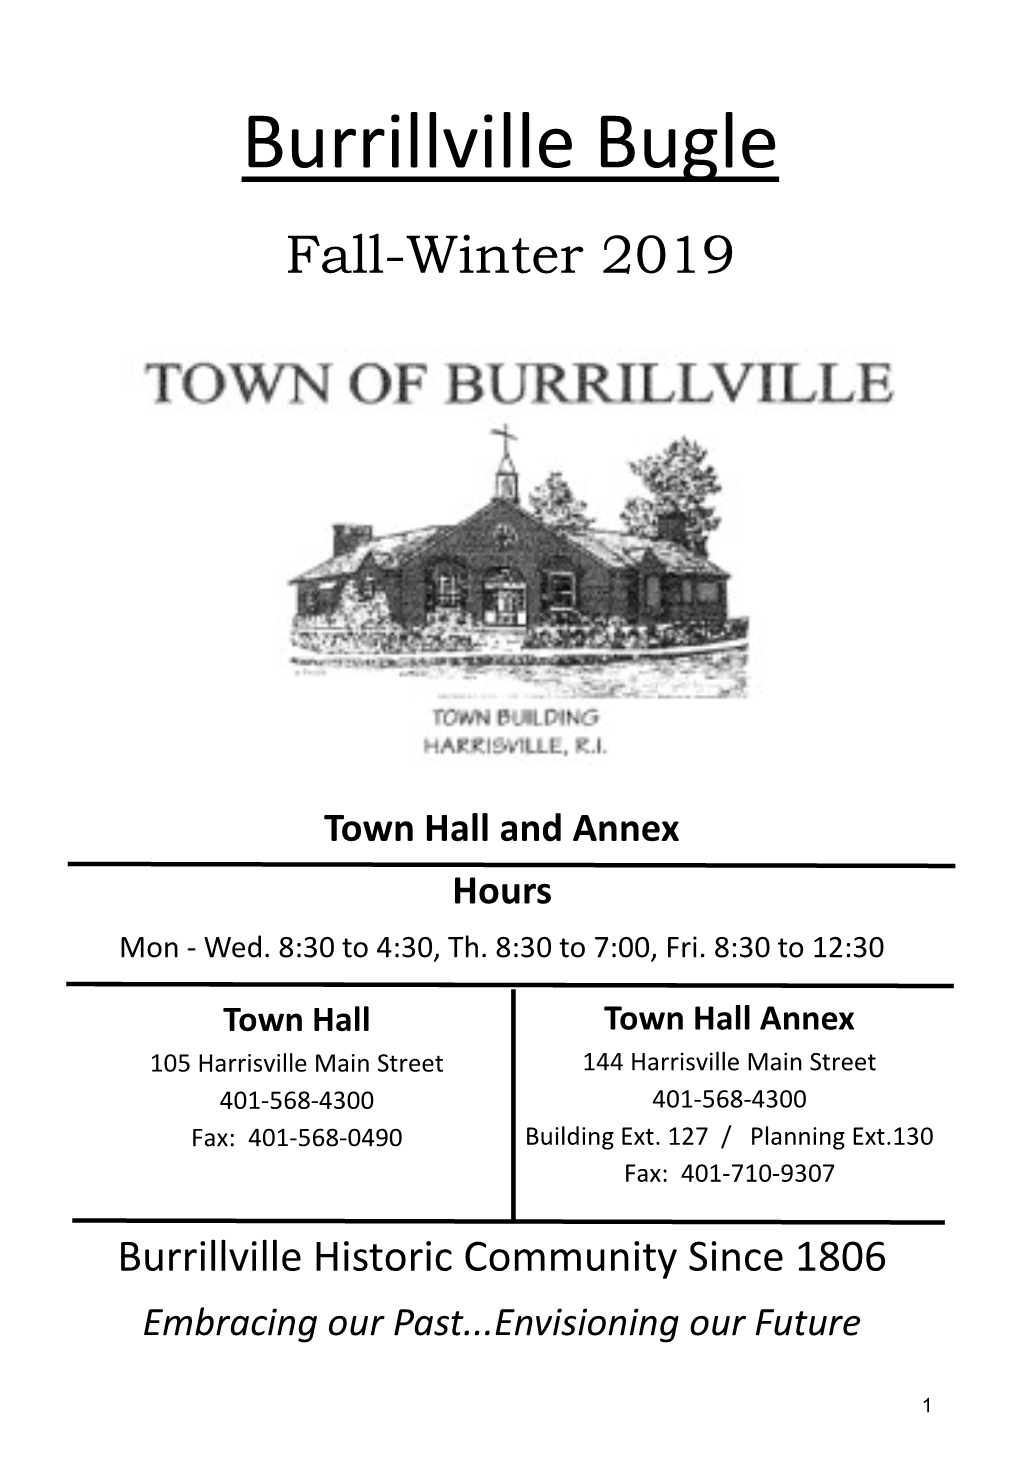 Town Hall and Annex Hours Mon - Wed